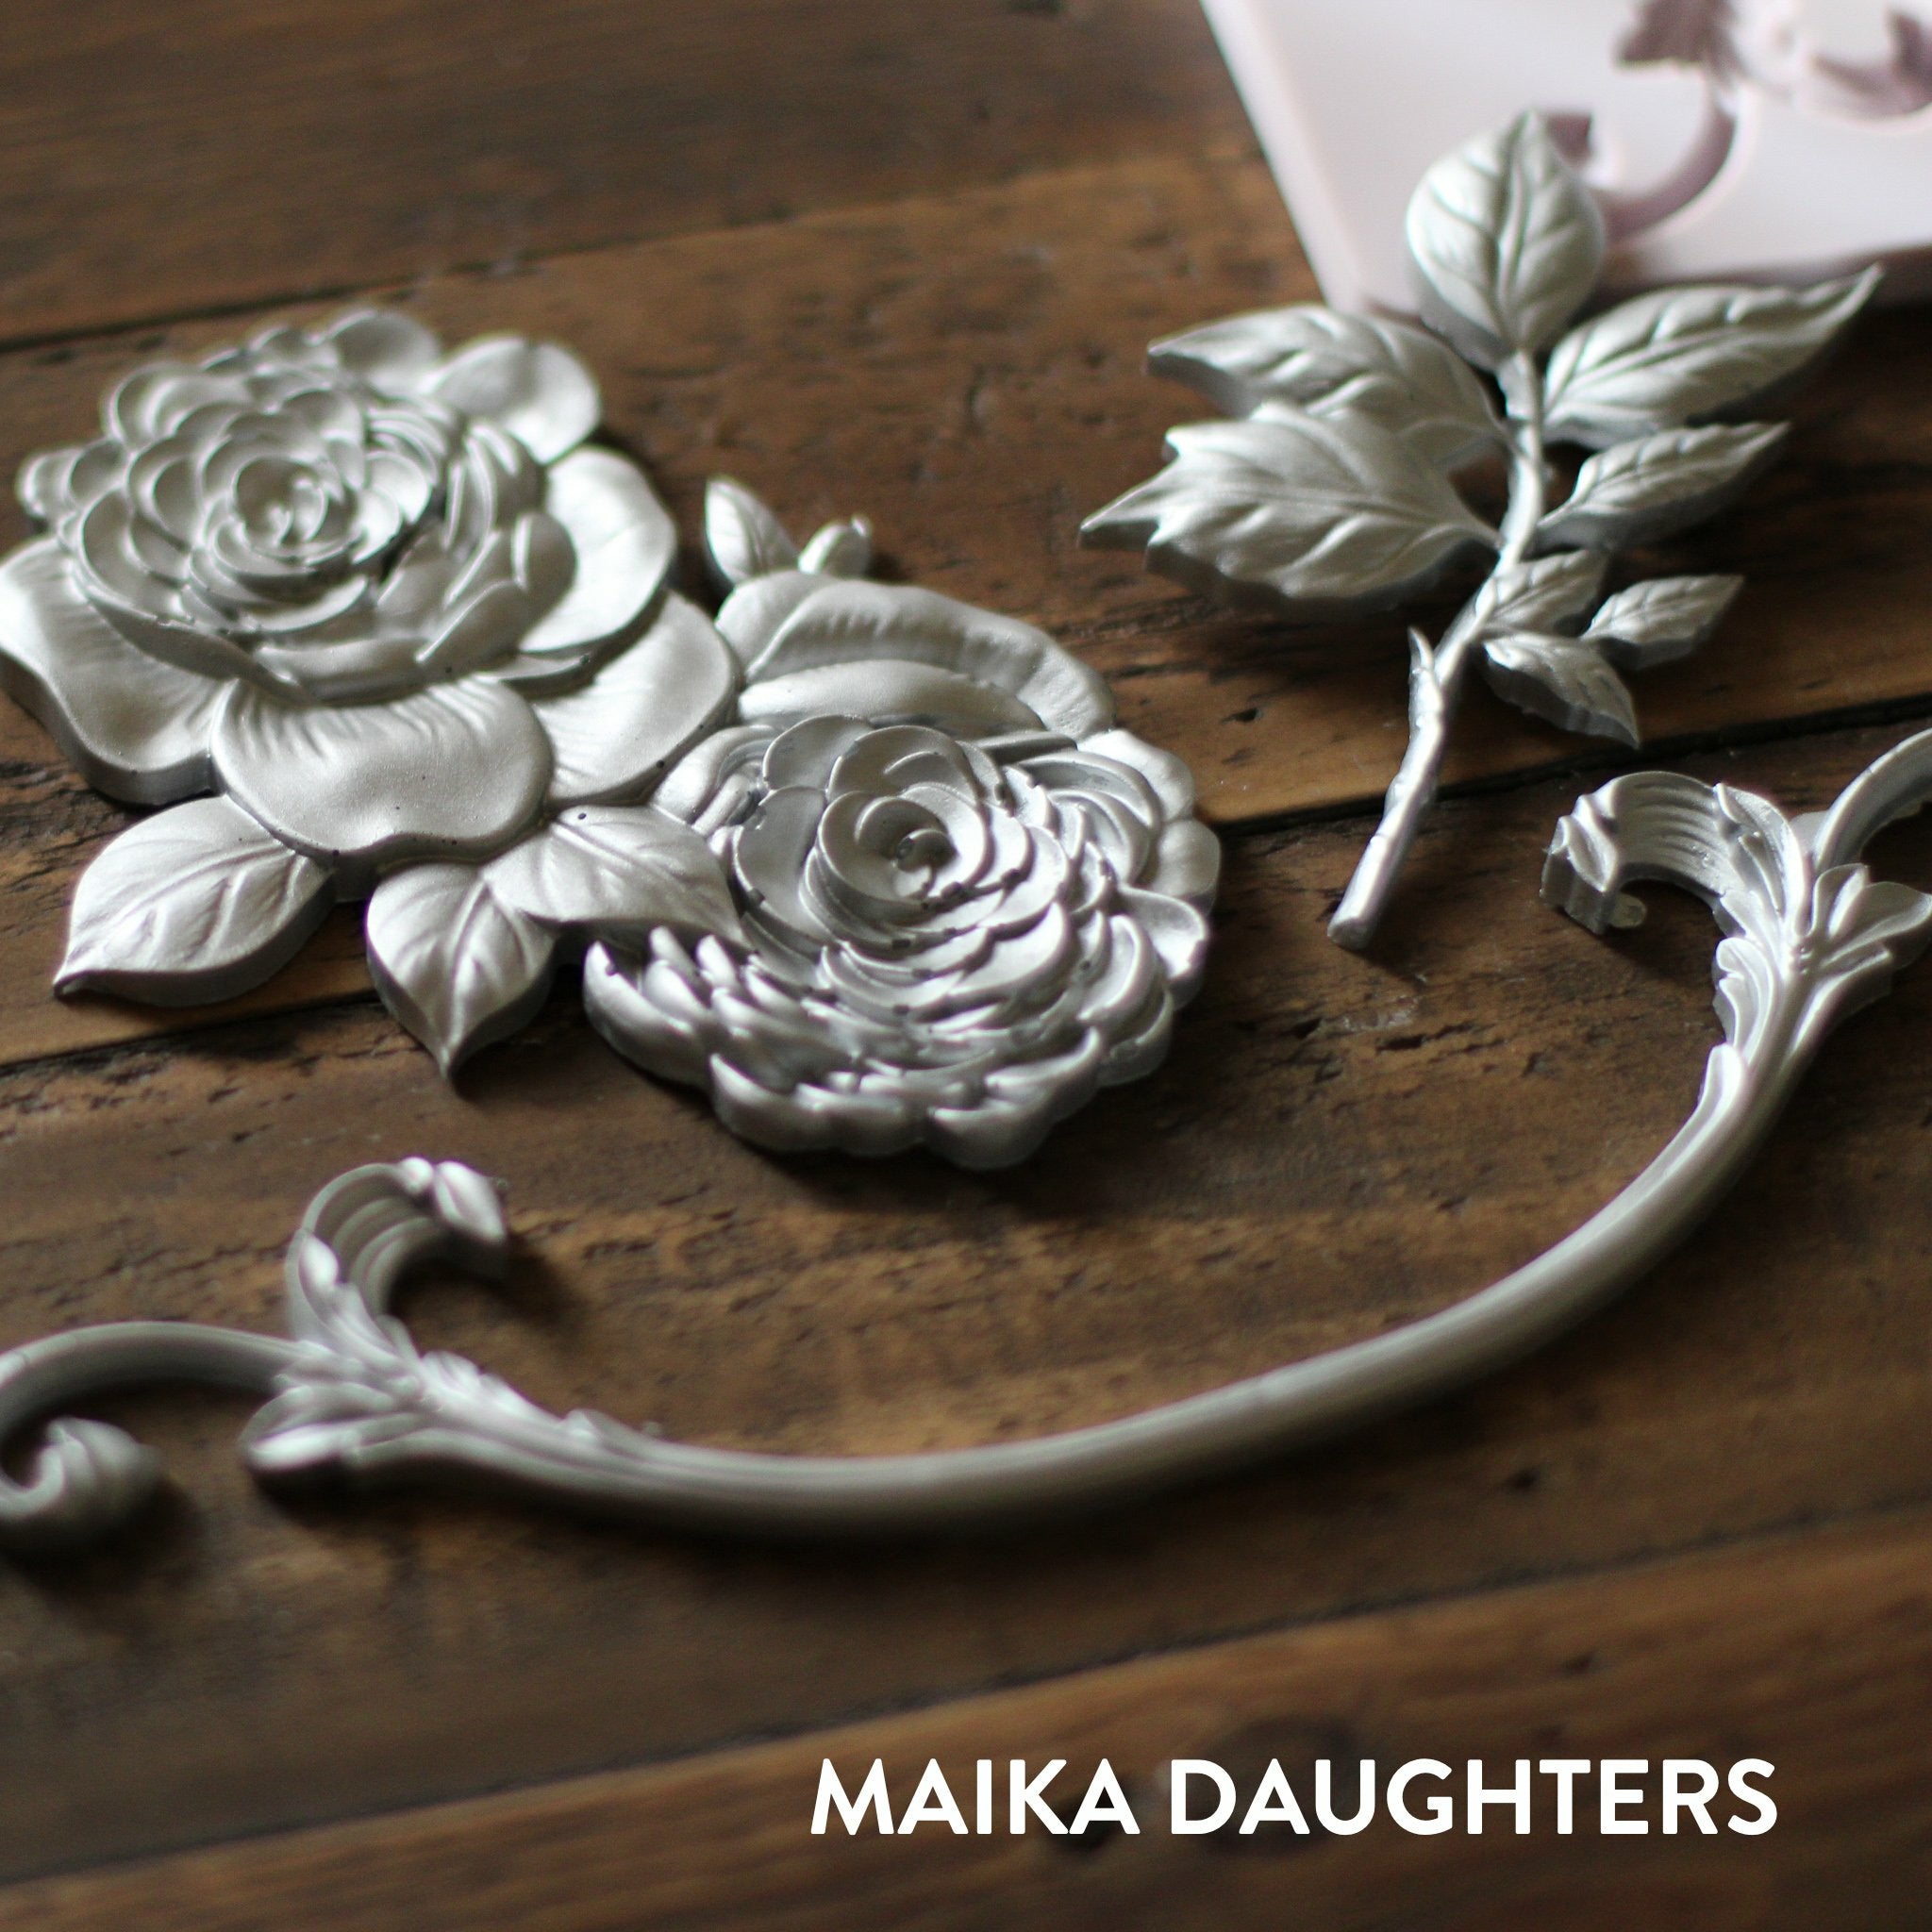 Wooden background with a angled view of the Victorian Rose castings in silver. A white Maika Daughters logo is in the bottom right corner